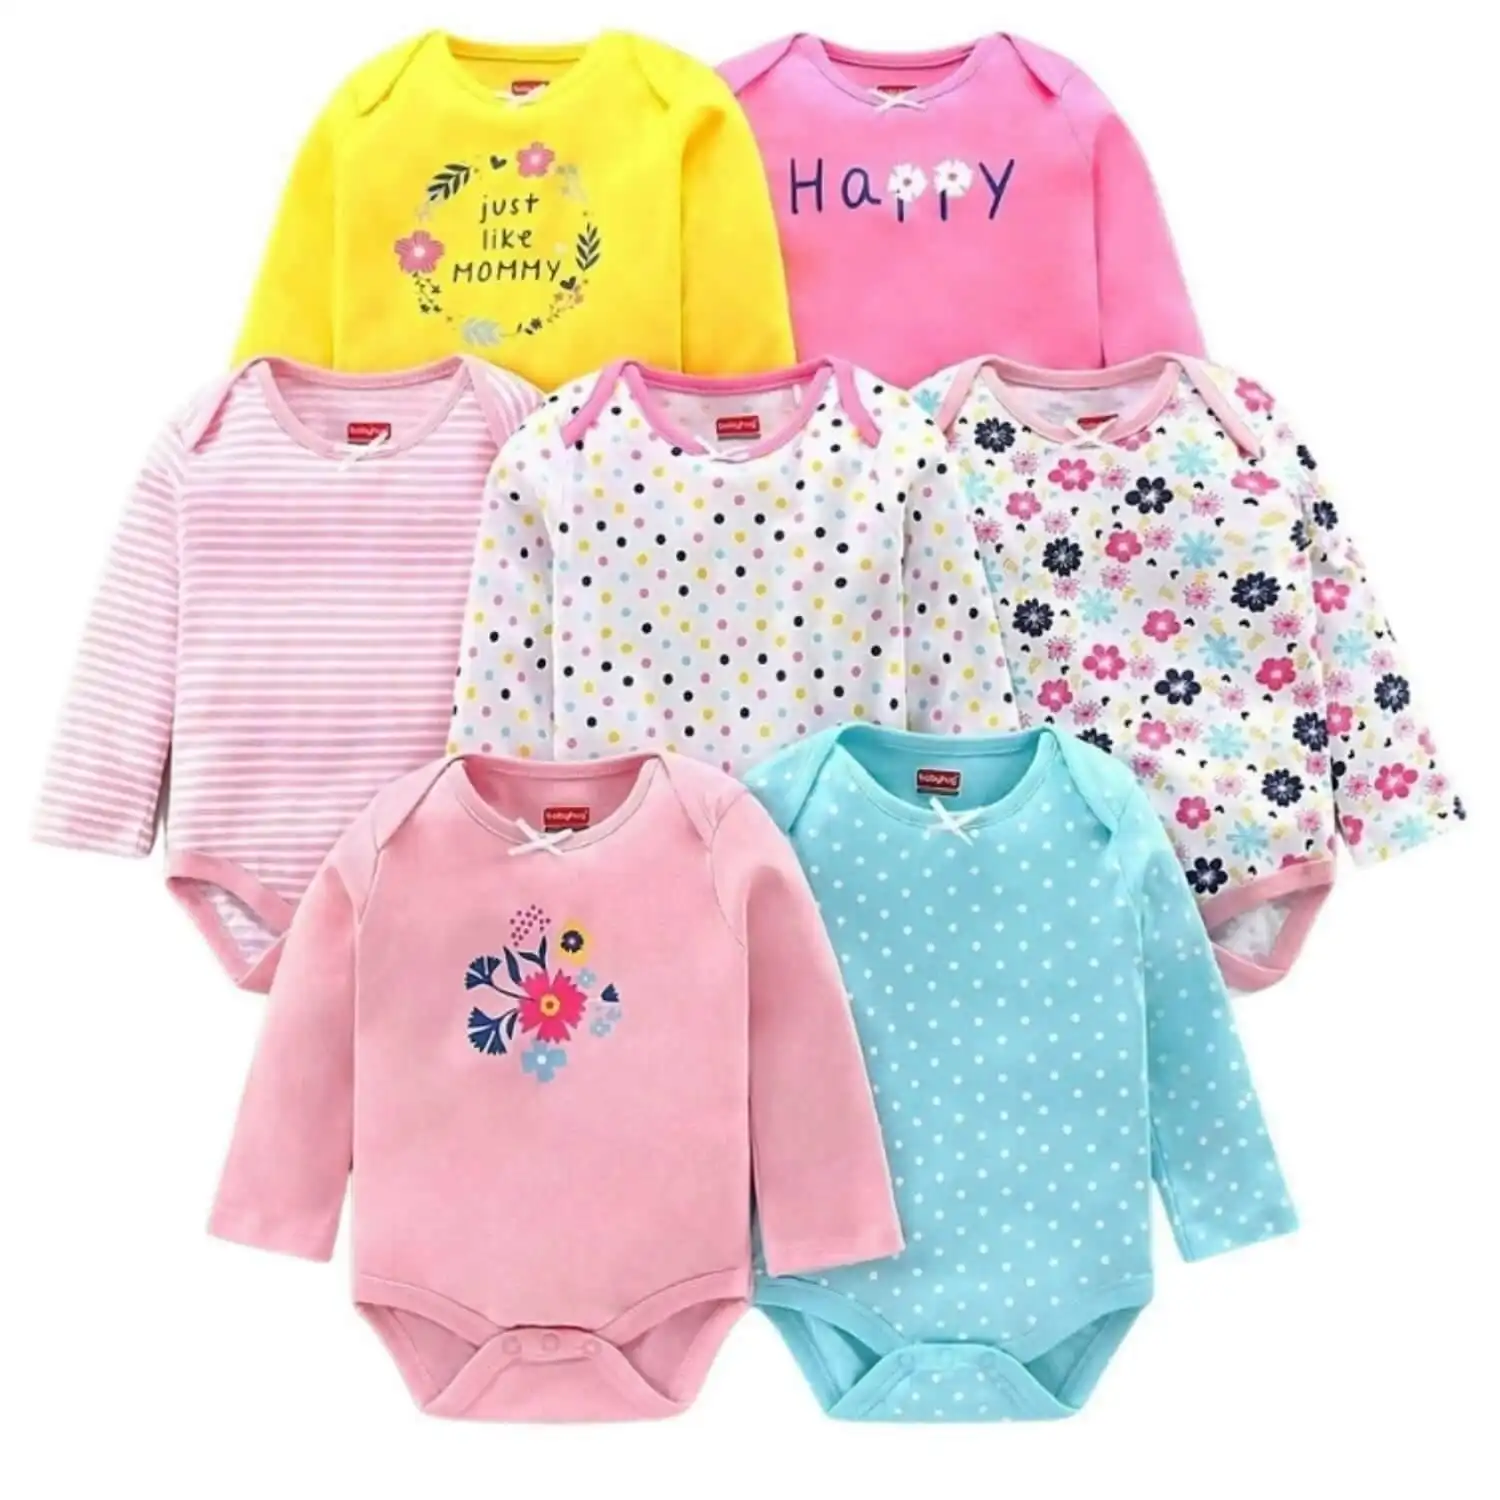 BabiesMart 7 Pack Unisex Baby Onesies Baby Clothes 100% Cotton